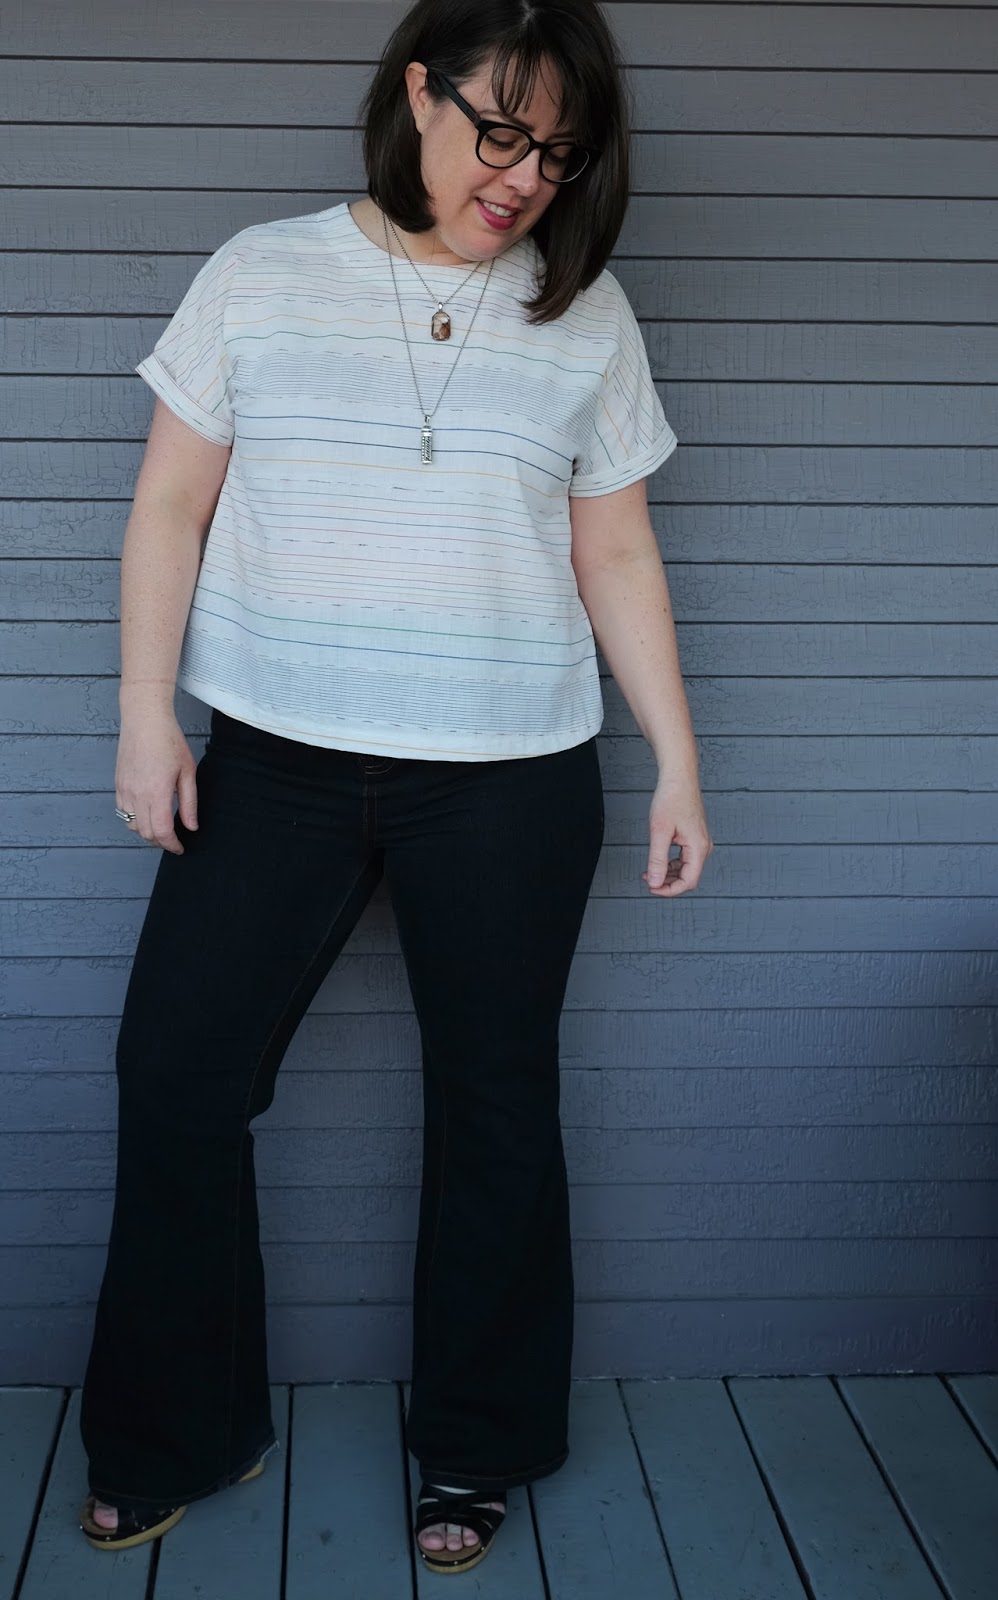 Cookin' & Craftin': Testing, testing: Tilly & the Buttons Stevie Tunic